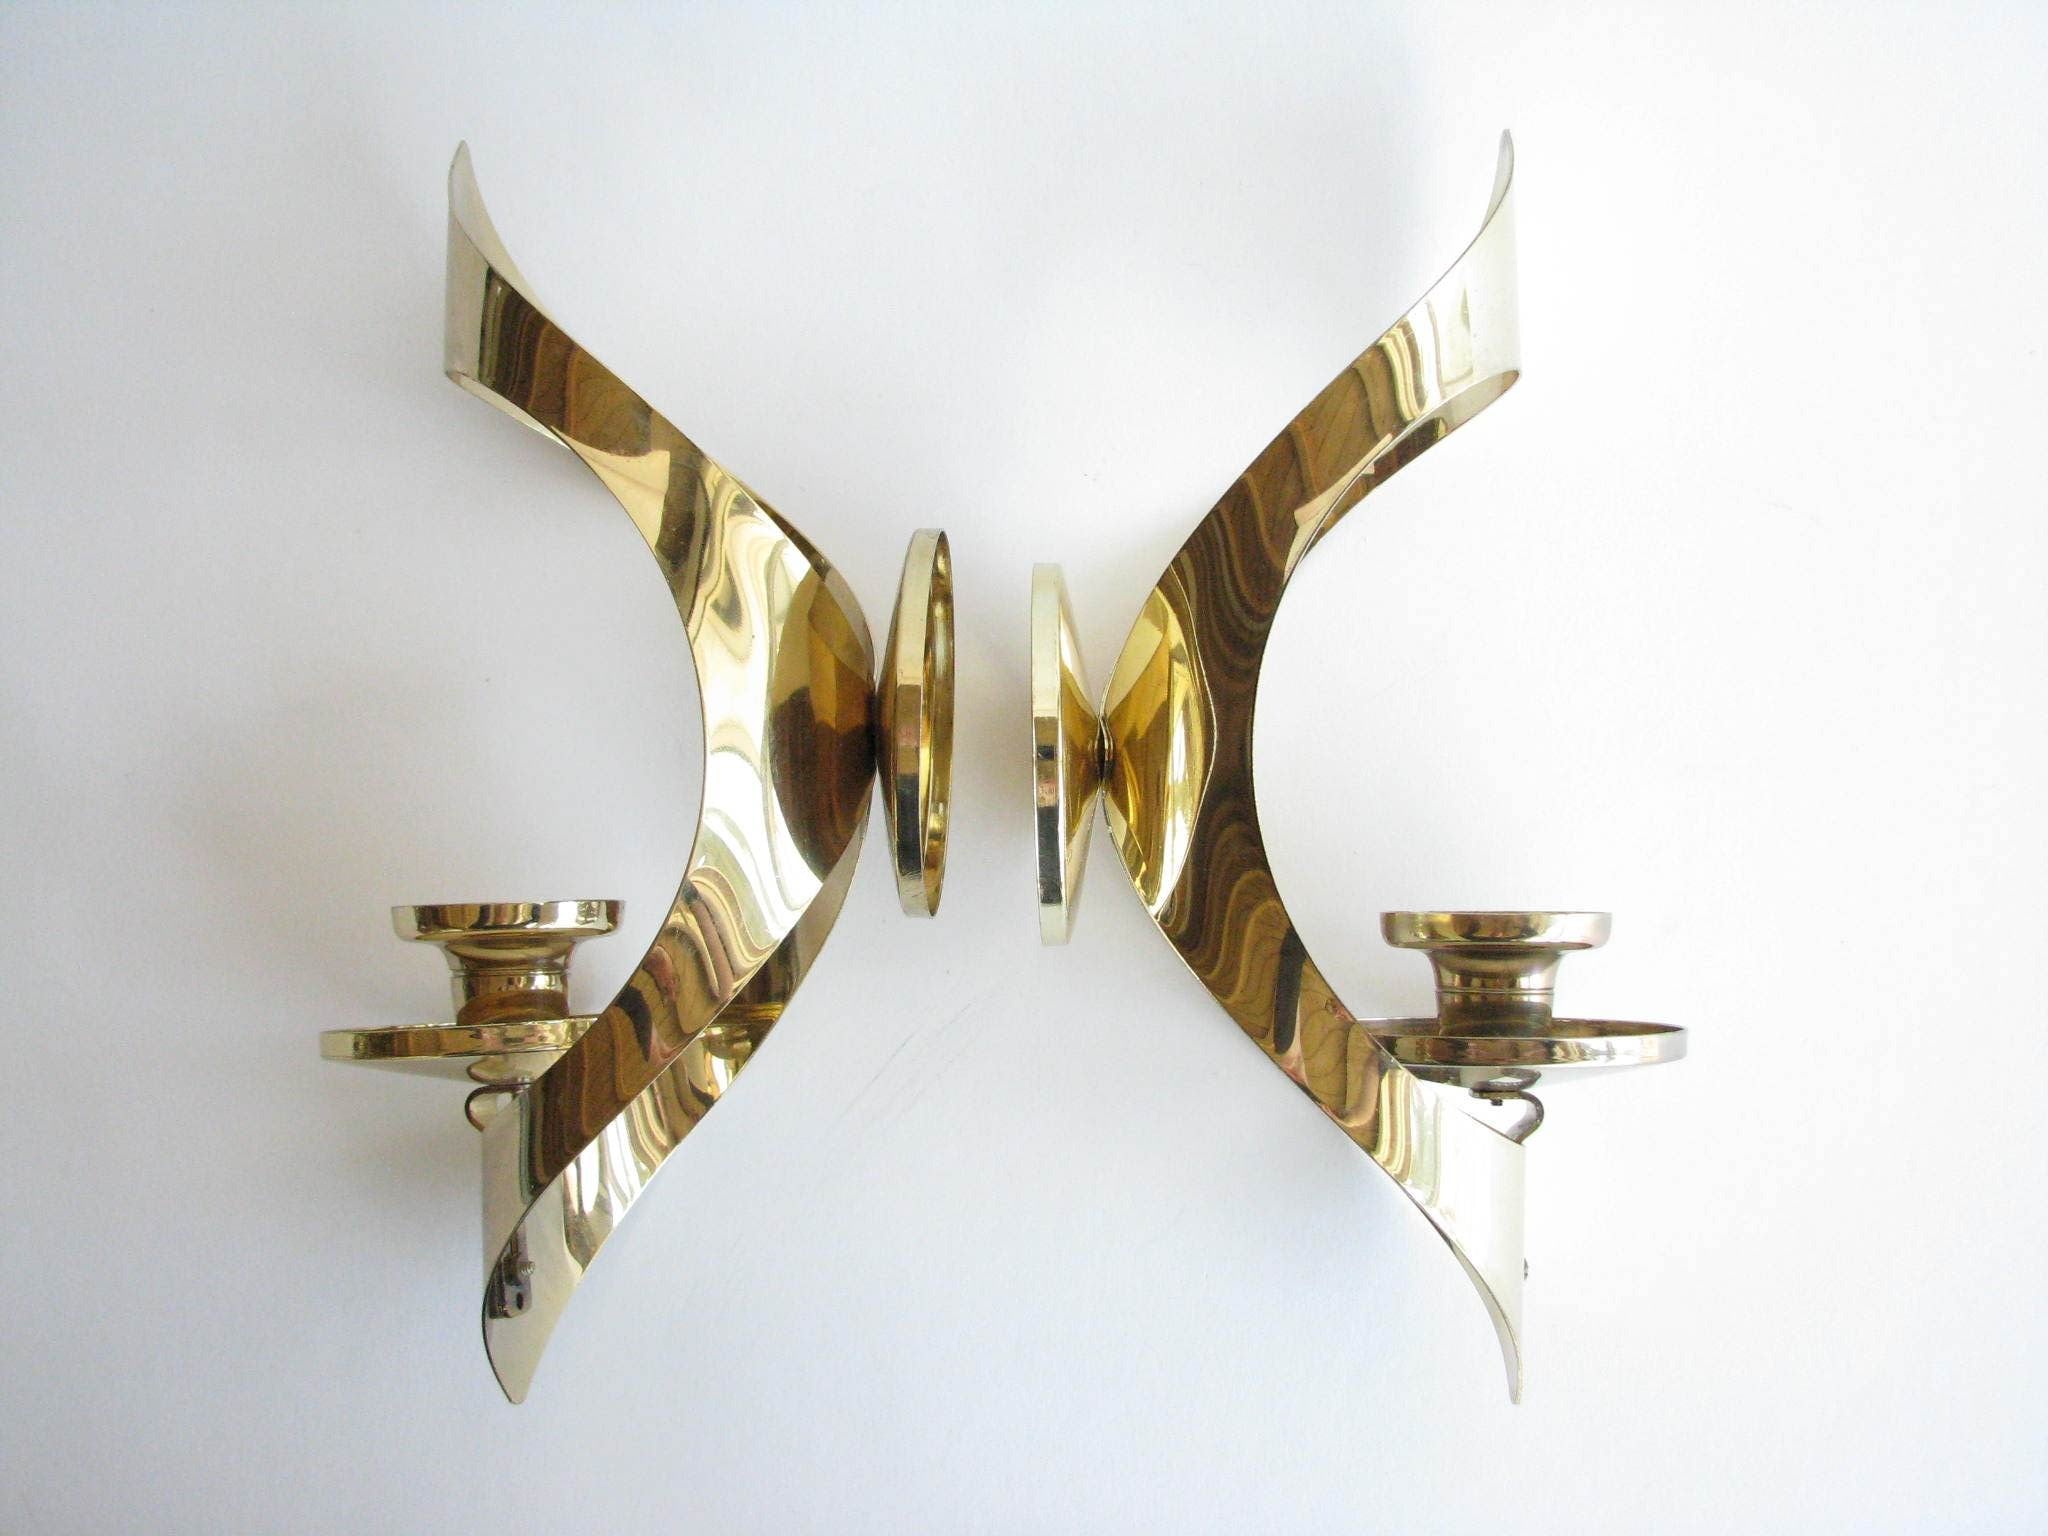 edgebrookhouse - Vintage Mascot Brass Wall Candle Sconces / Holders - a Pair